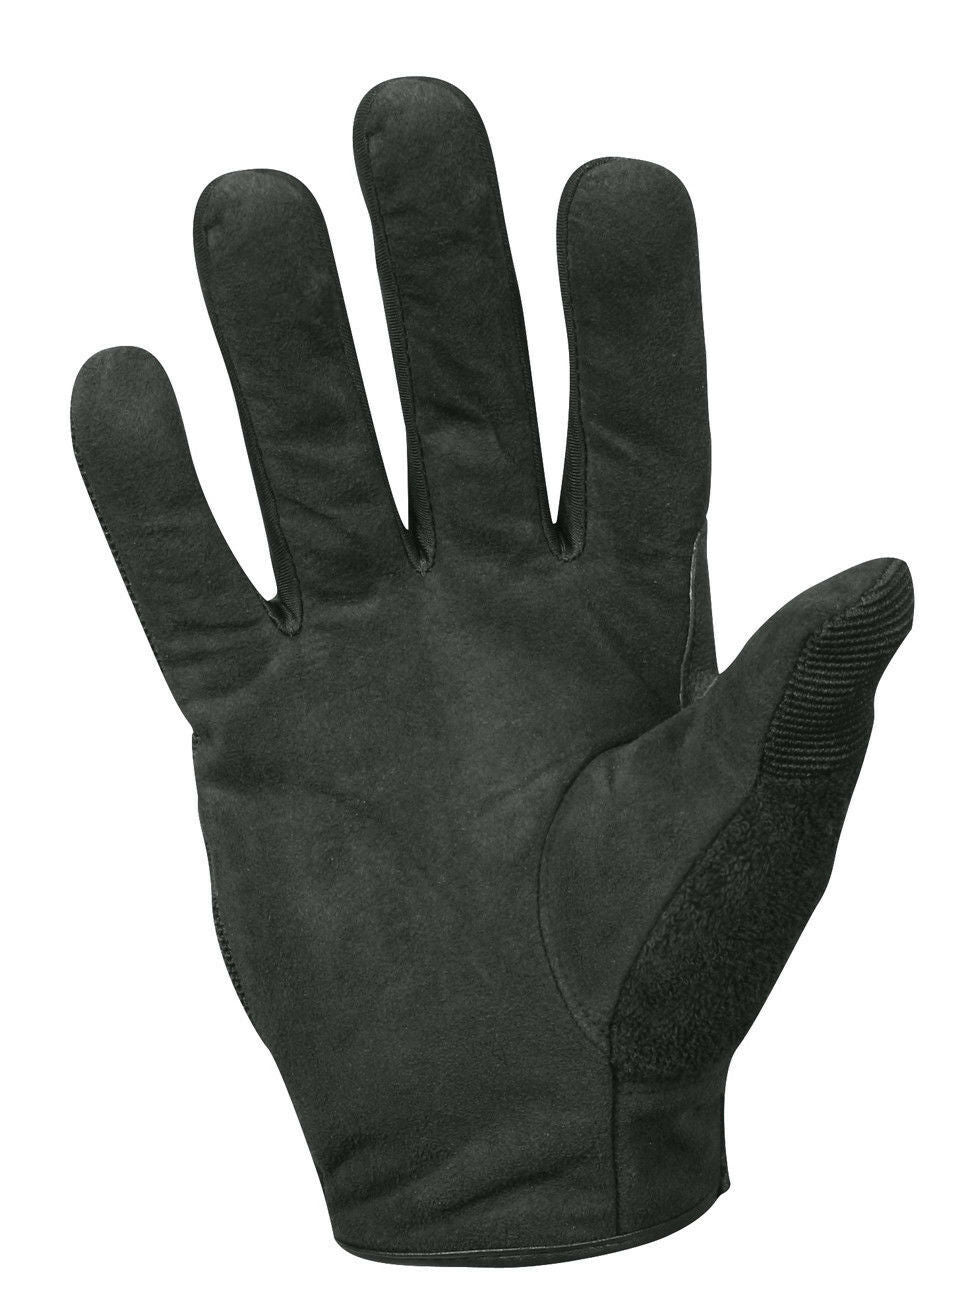 Rothco Street Shield Cut Resistant Police Gloves